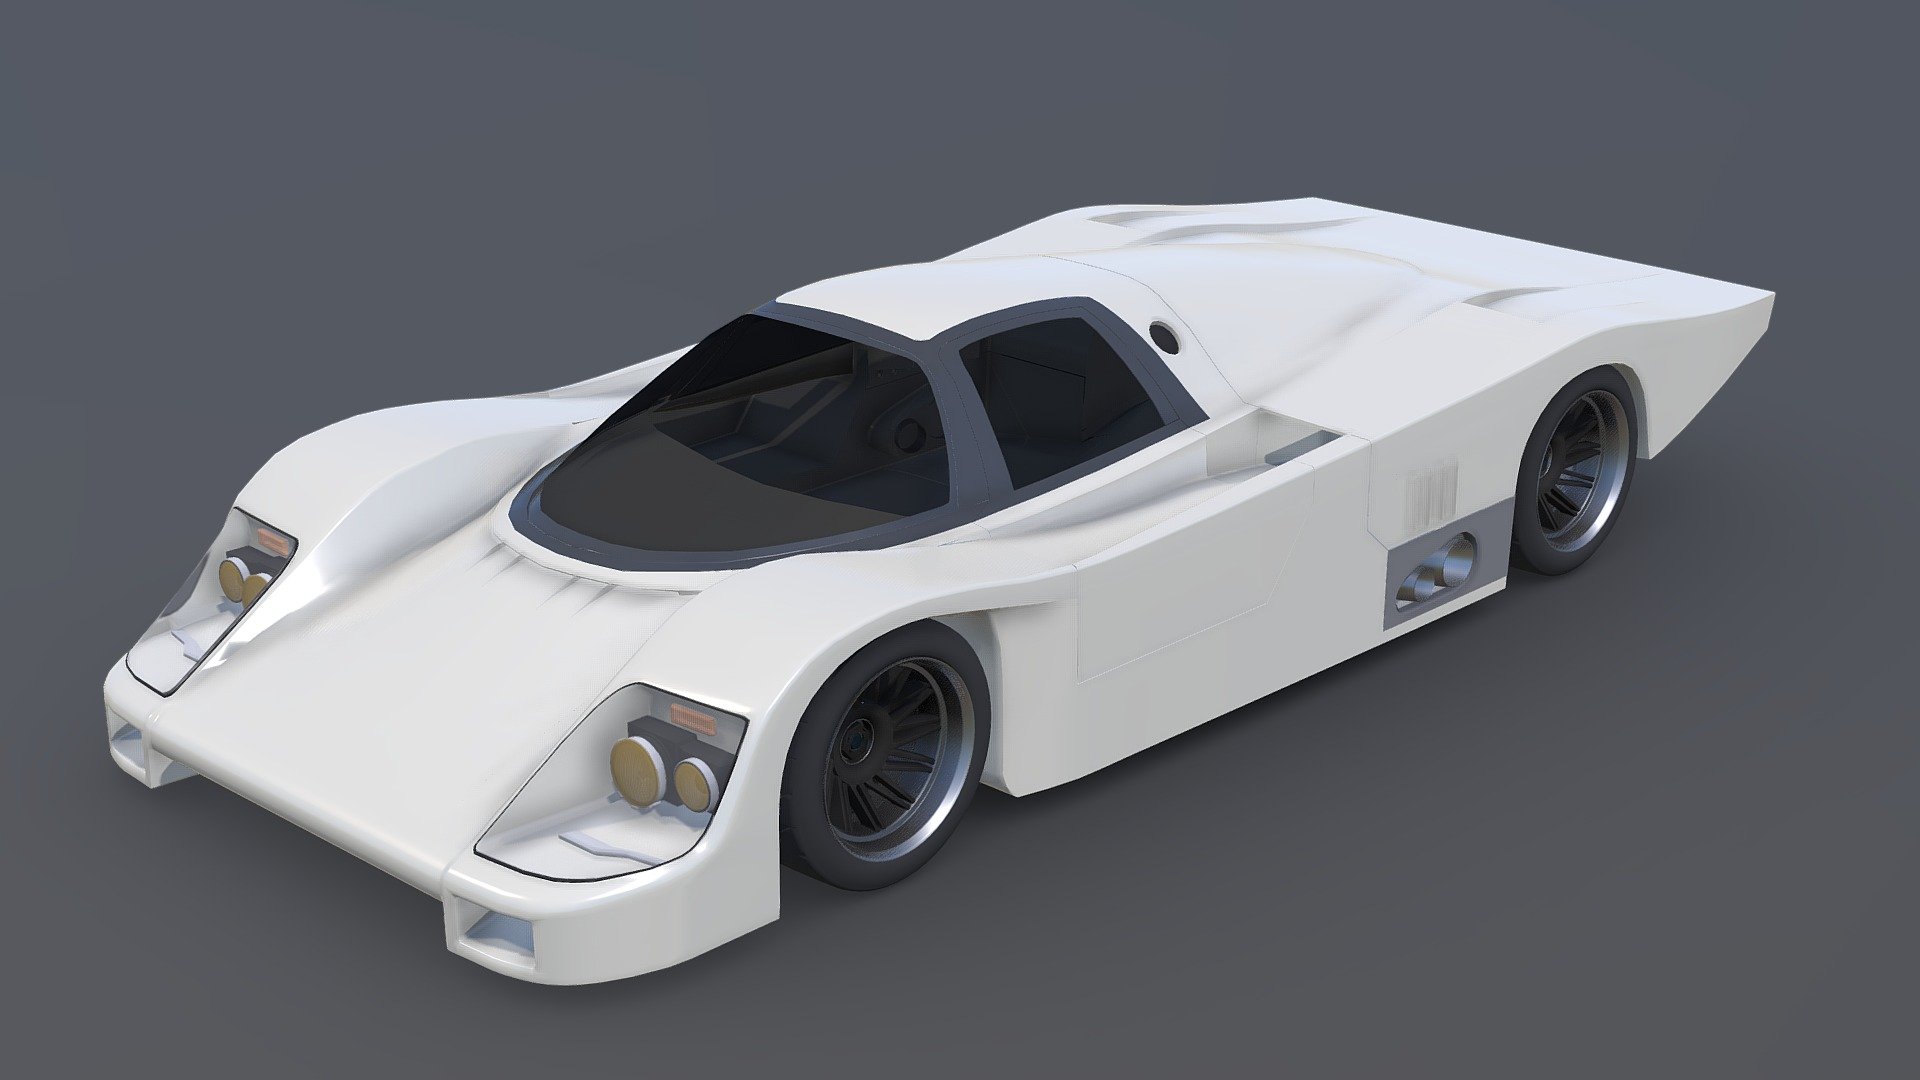 Generic low-poly mid 80's Group C racing car based on Porsche 962 ready to be used in game. As a fan of Lemans racing I decided to make something lemans related 3d model